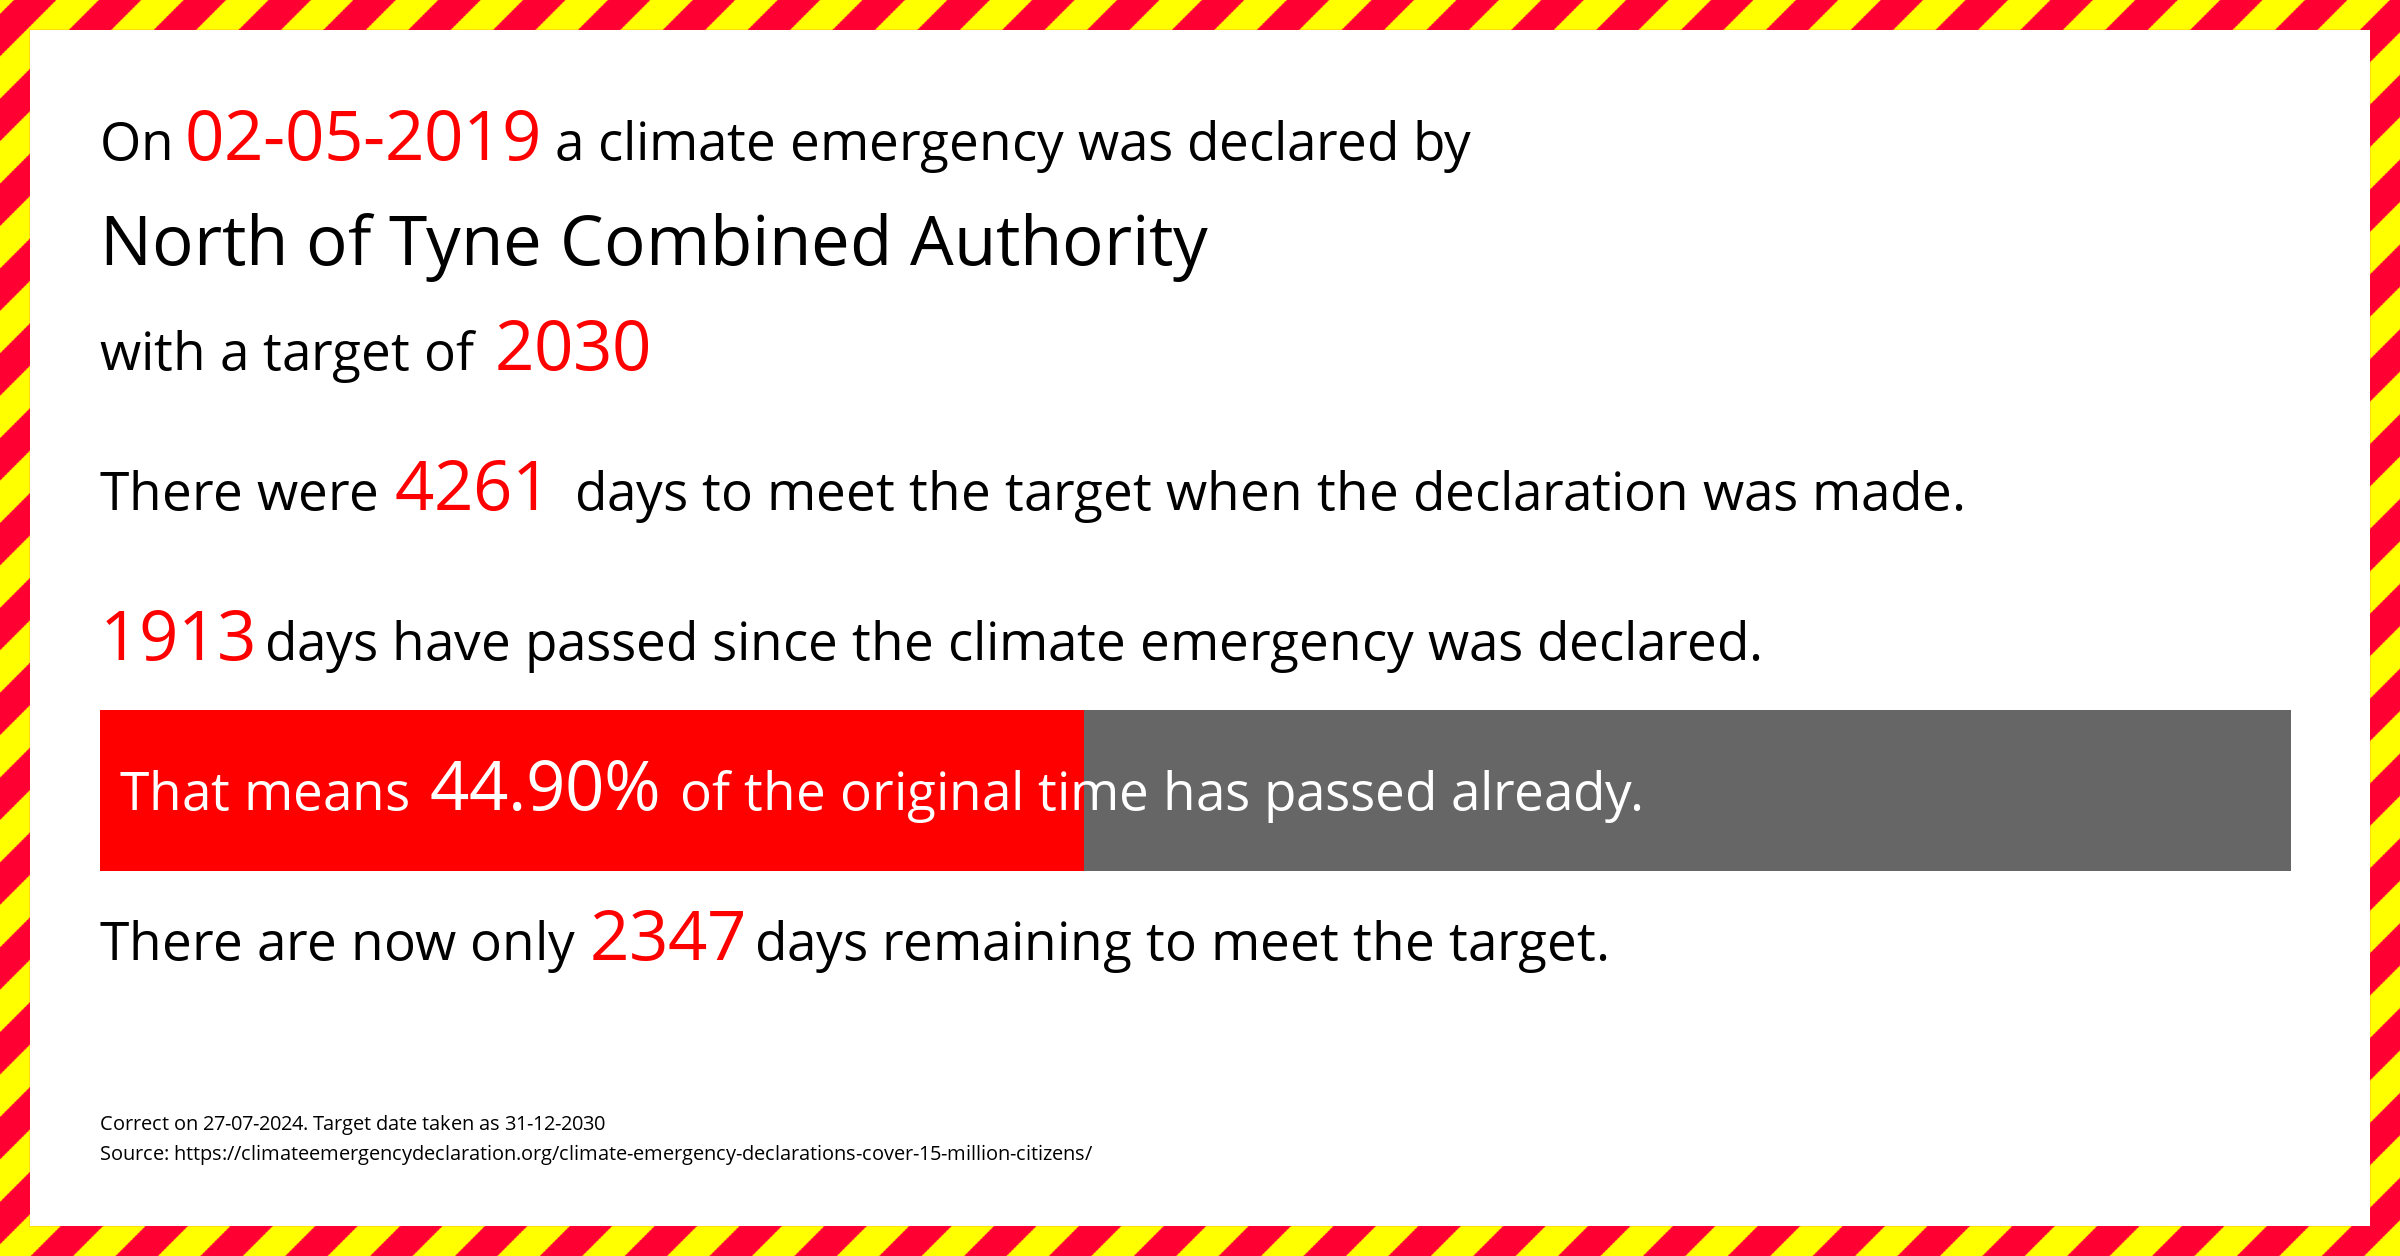 North of Tyne Combined Authority declared a Climate emergency on Thursday 2nd May 2019, with a target of 2030.